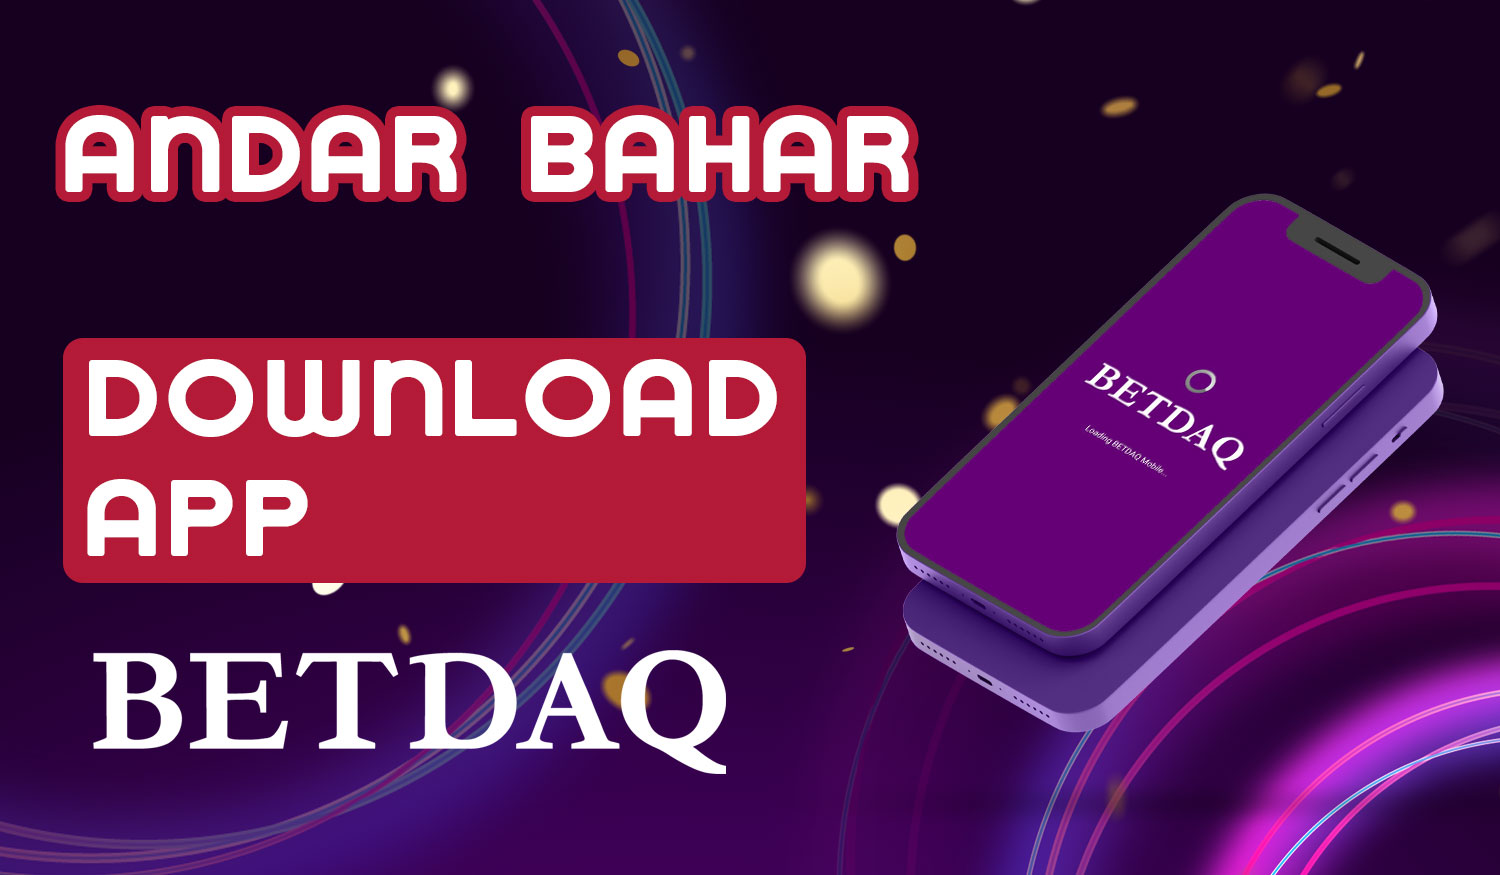 Detailed guide on how to download and install the Betdaq India mobile application for playing Andar Bahar